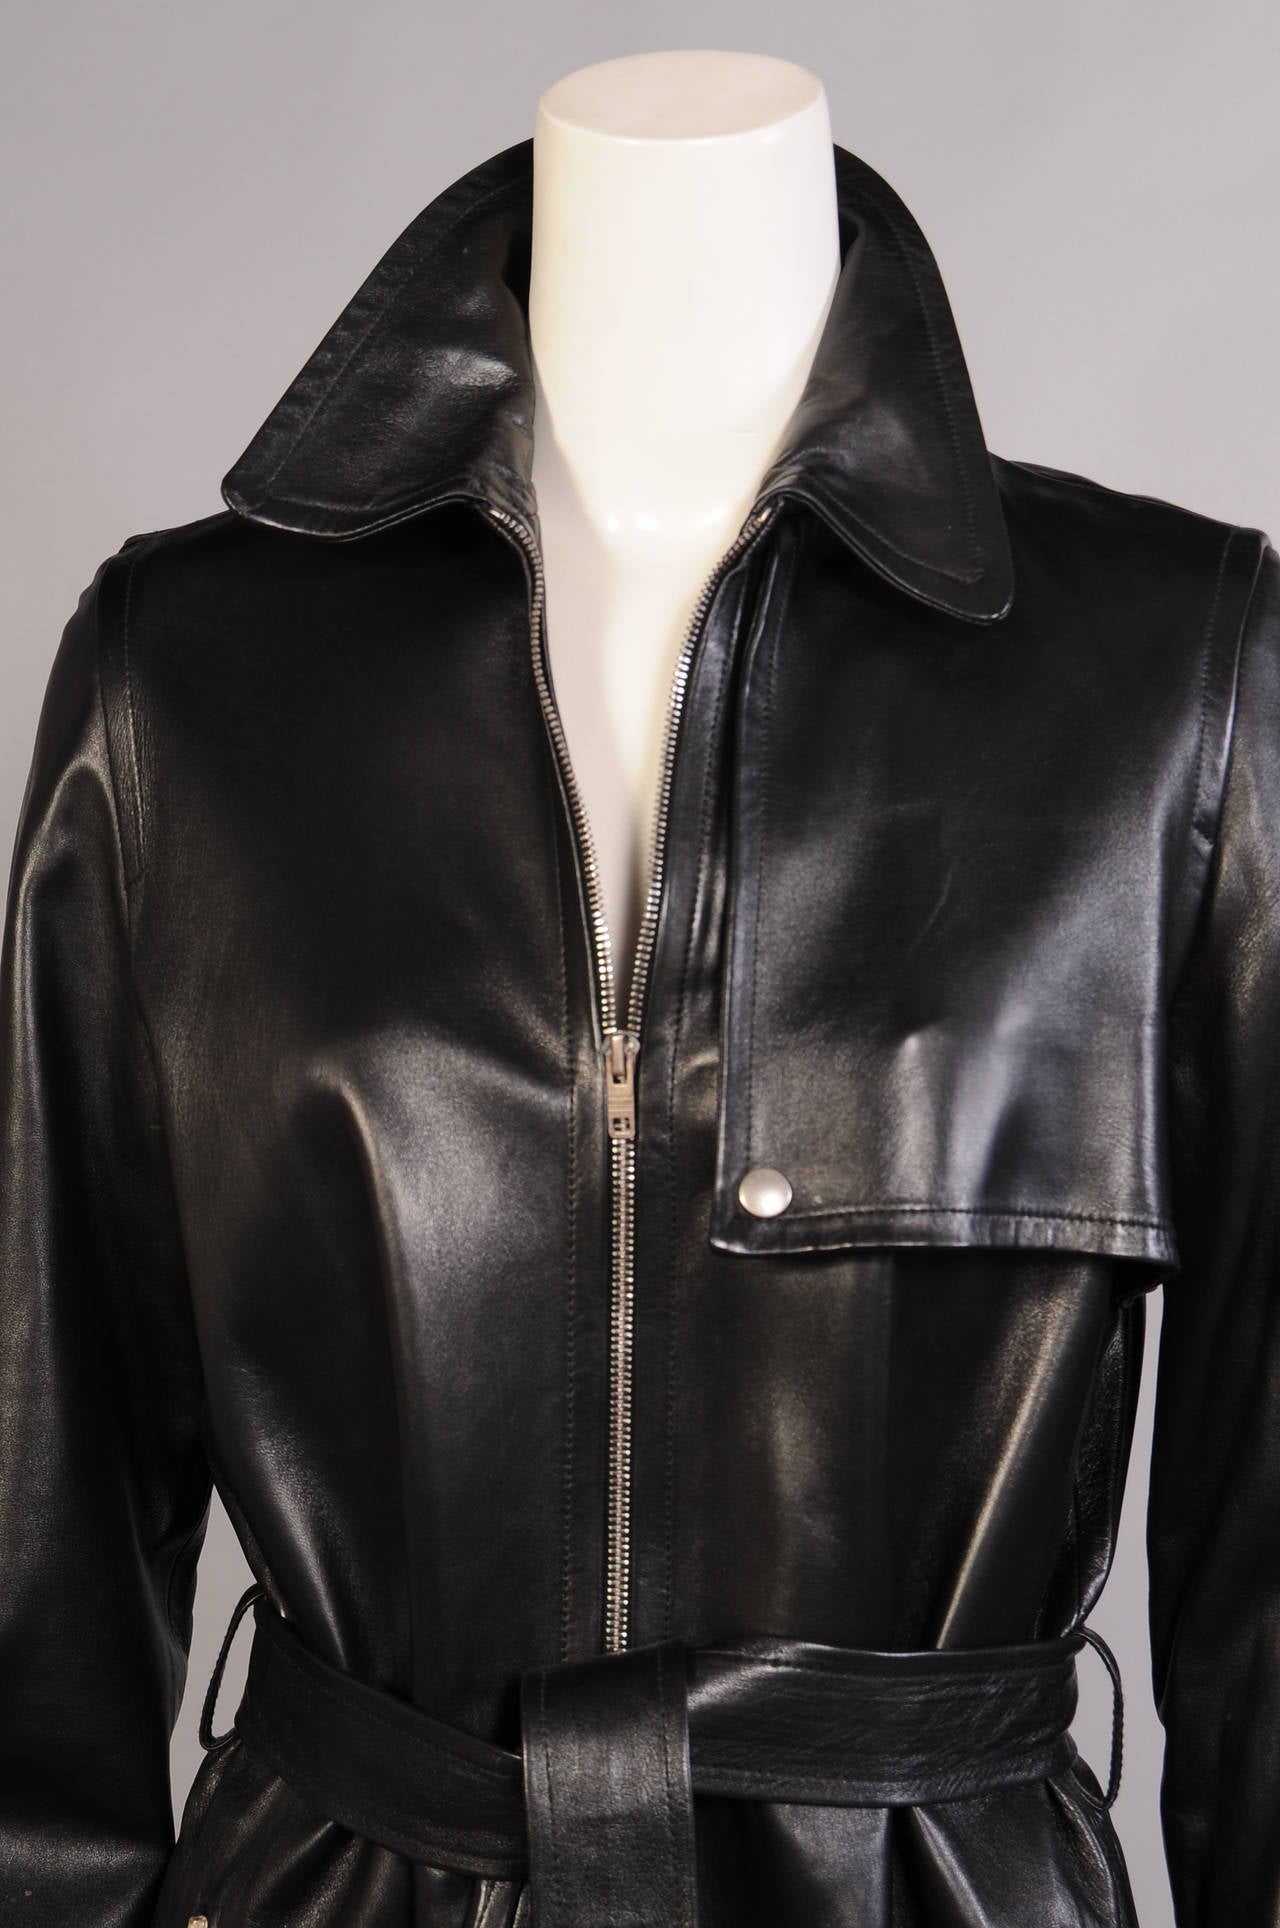 Light weight, butter soft black lambskin is accented with metal zippers on the pockets and the center font closure. The coat is cut in the classic belted trench coat style. It is marked a size 38 and it is in excellent